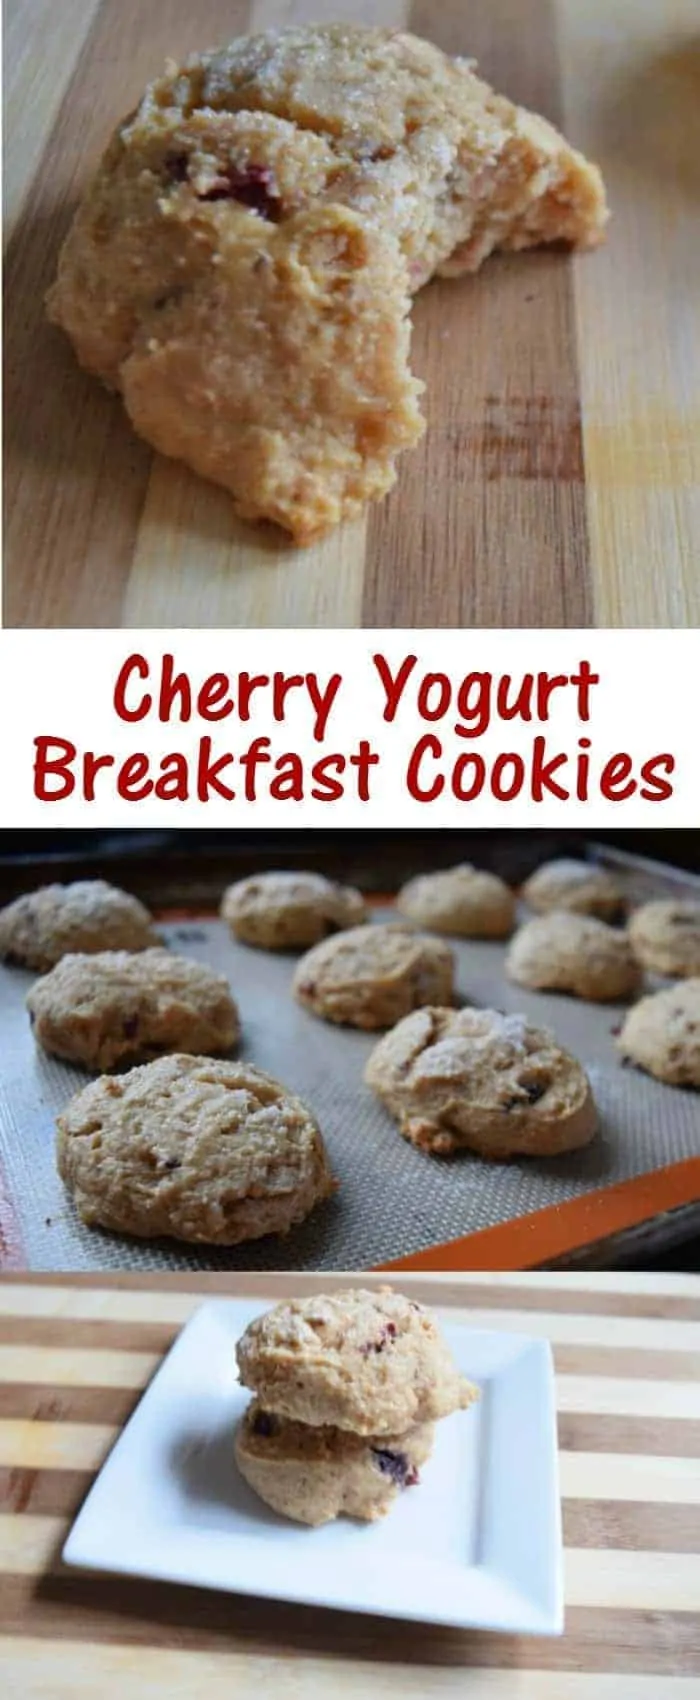 This recipe for cherry yogurt breakfast cookies is a perfect protein packed meal or snack. It's easy to make and has less sugar than you'd expect. Perfect for a treat!